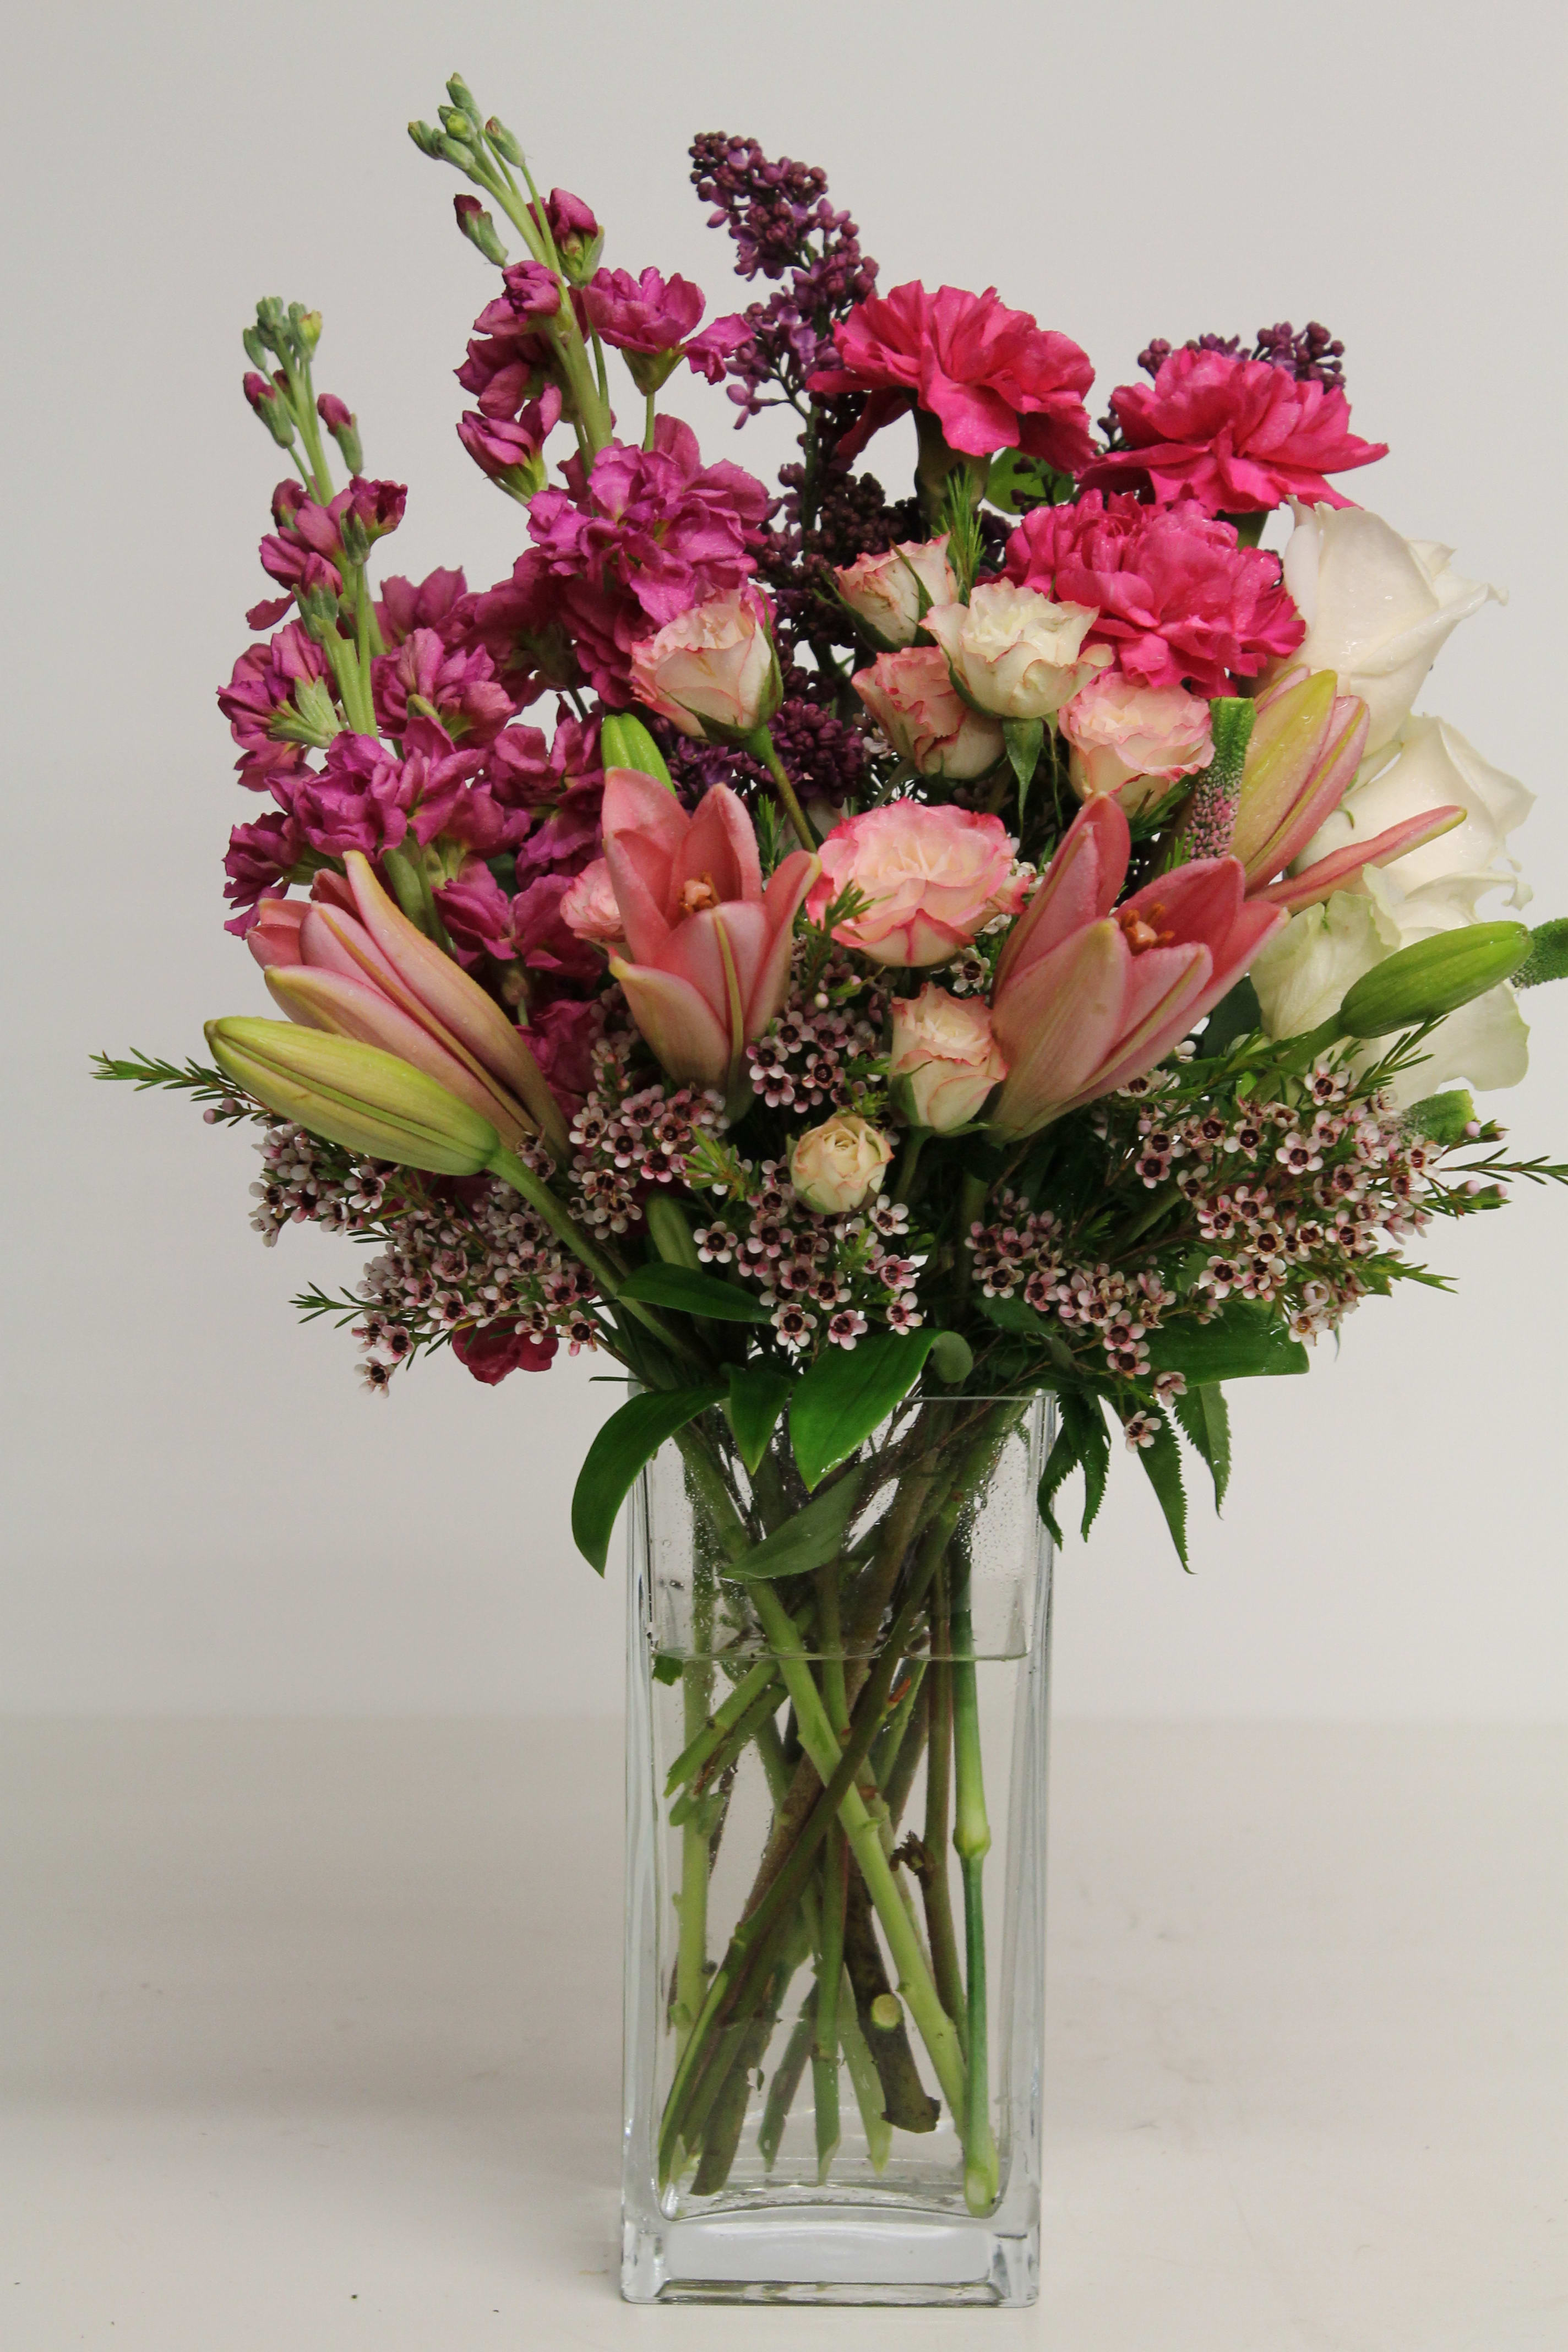 For my Loving Mom - Lilac, Rose, Spray Rose, Wax, Stock, Carnation, Asiatic Lilly